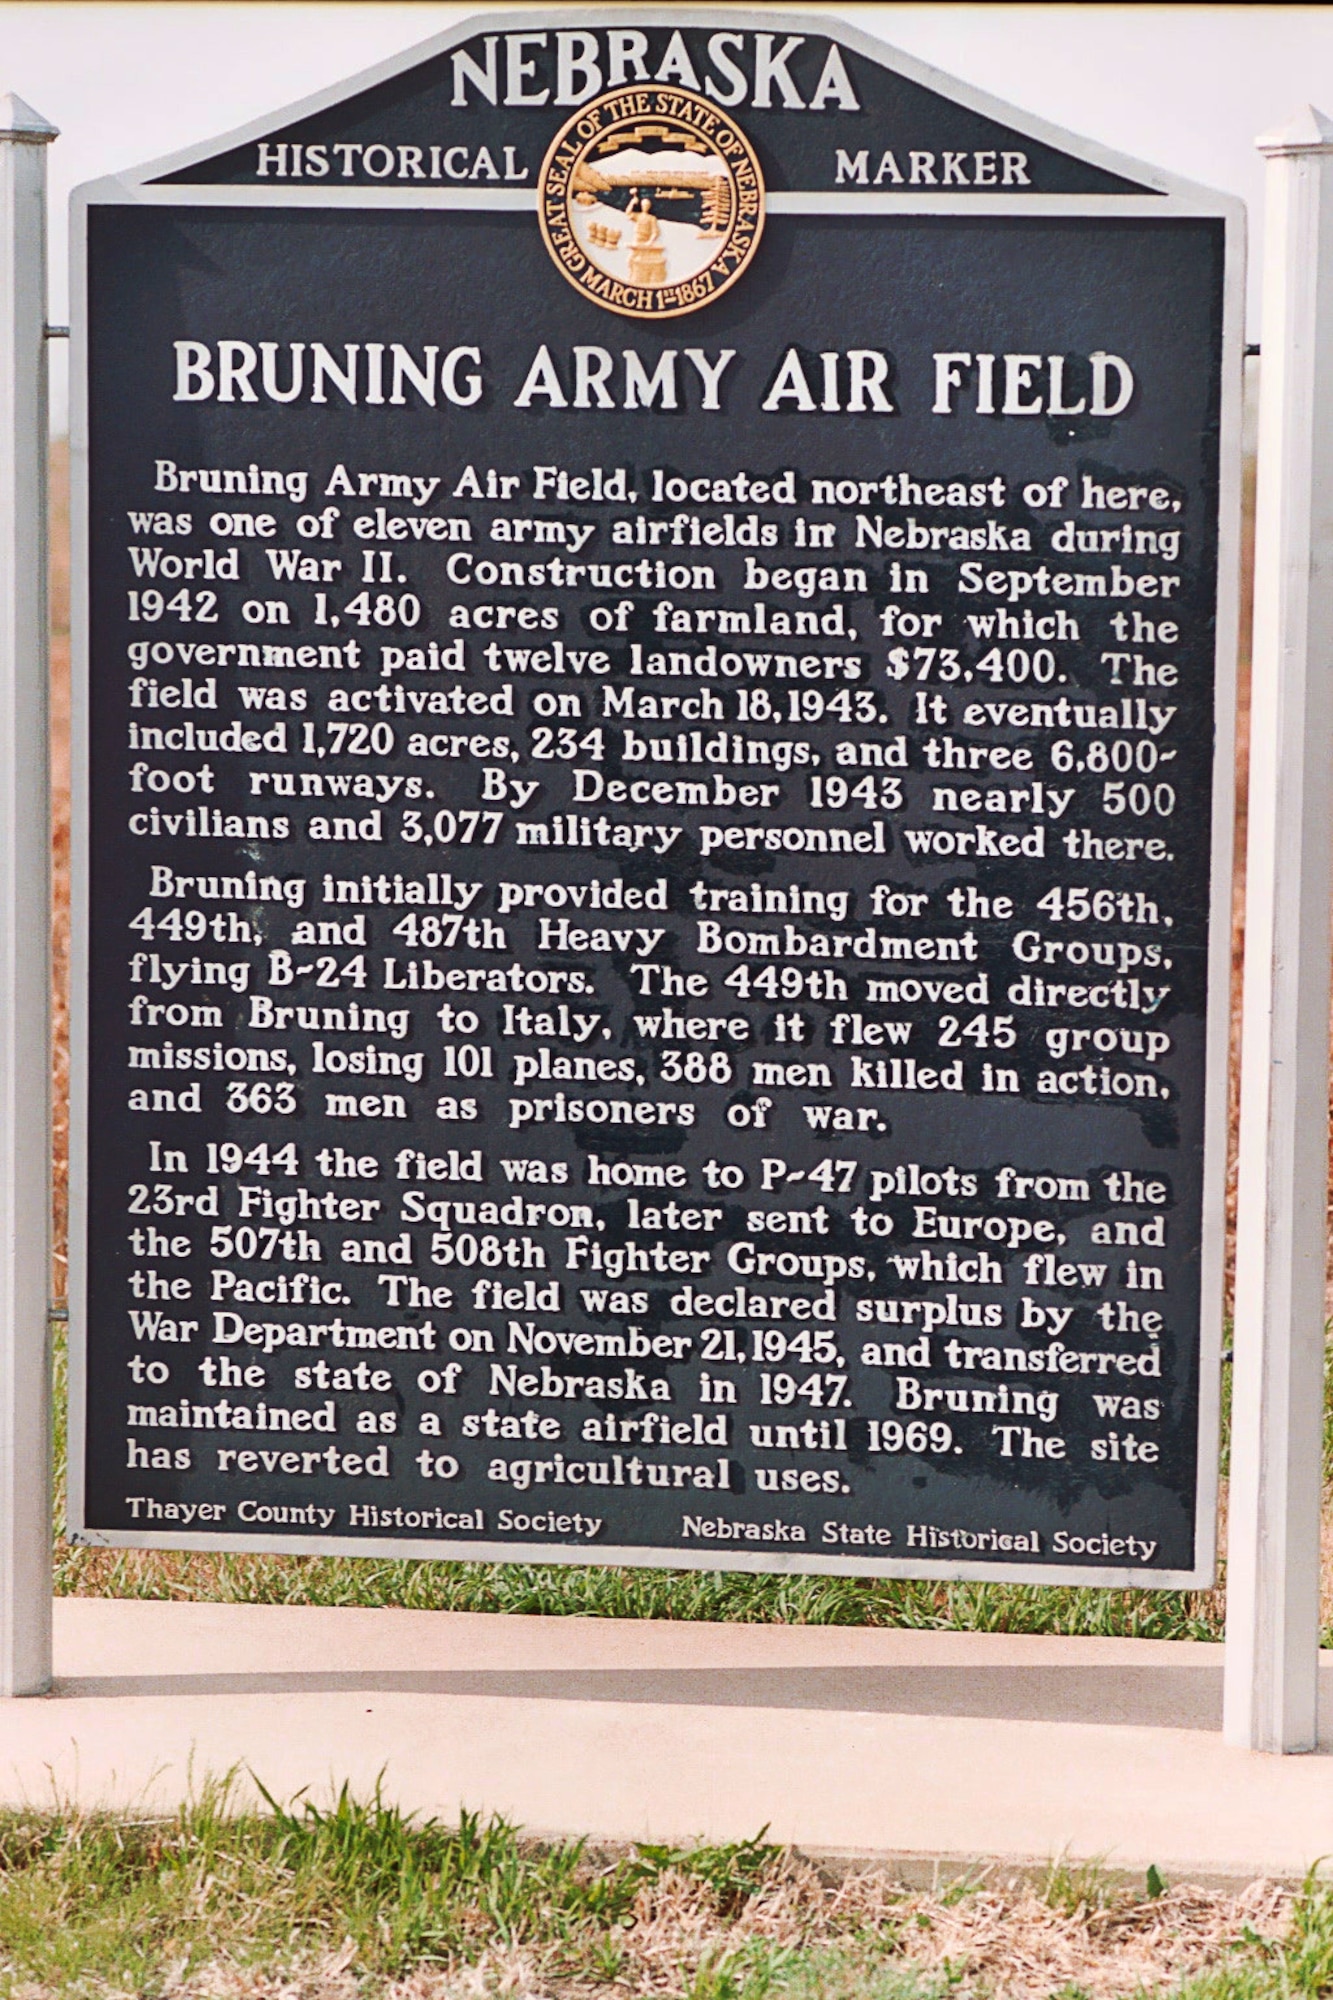 A historical marker stands on the former location of Bruning Army Air Field, Neb., in this photo taken on July 17, 2004.  The 507th Fighter Group, the precursor to the modern-day 507th Air Refueling Wing, was activated at Bruning AAF in 1944.  (U.S. Air Force photo by Lt. Col. [ret.] Donald Klinko)